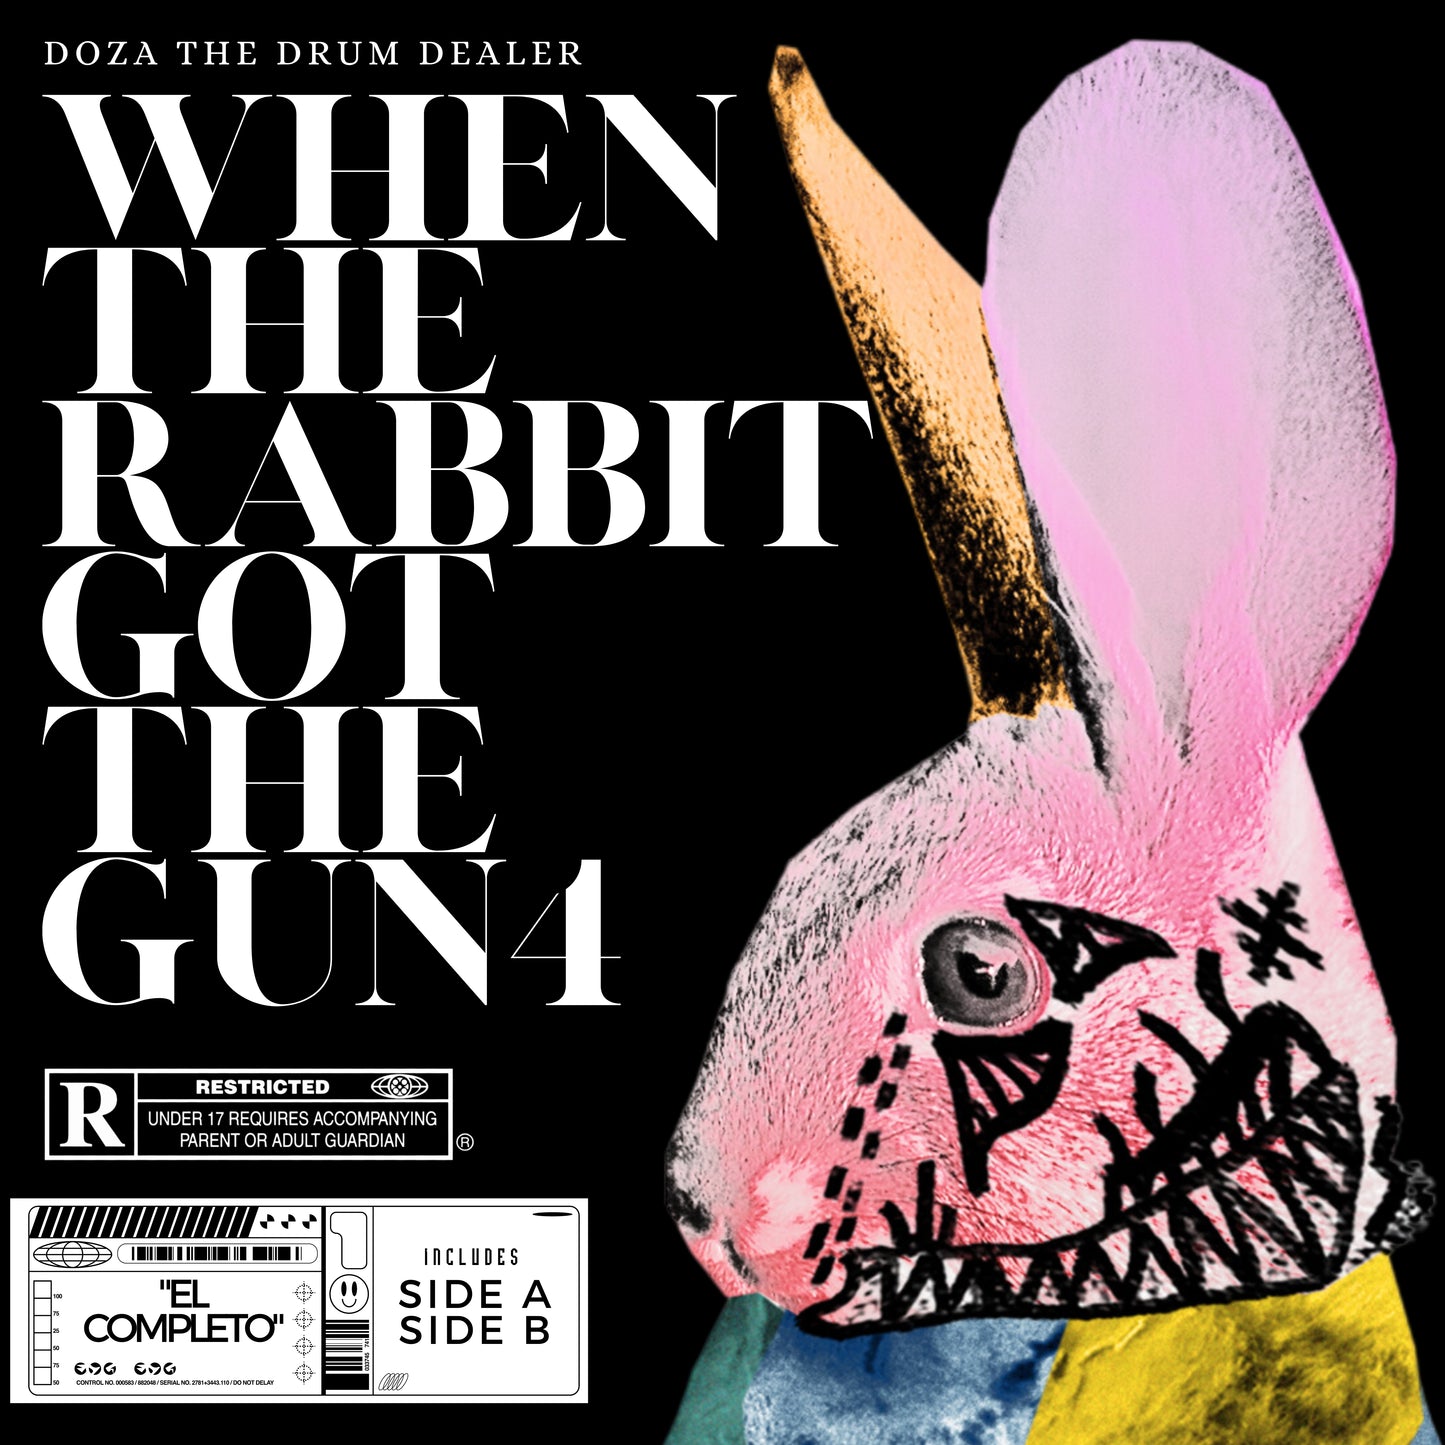 (EL COMPLETO SIDES A & B) WHEN THE RABBIT GOT THE GUN 4 by Doza The Drum Dealer